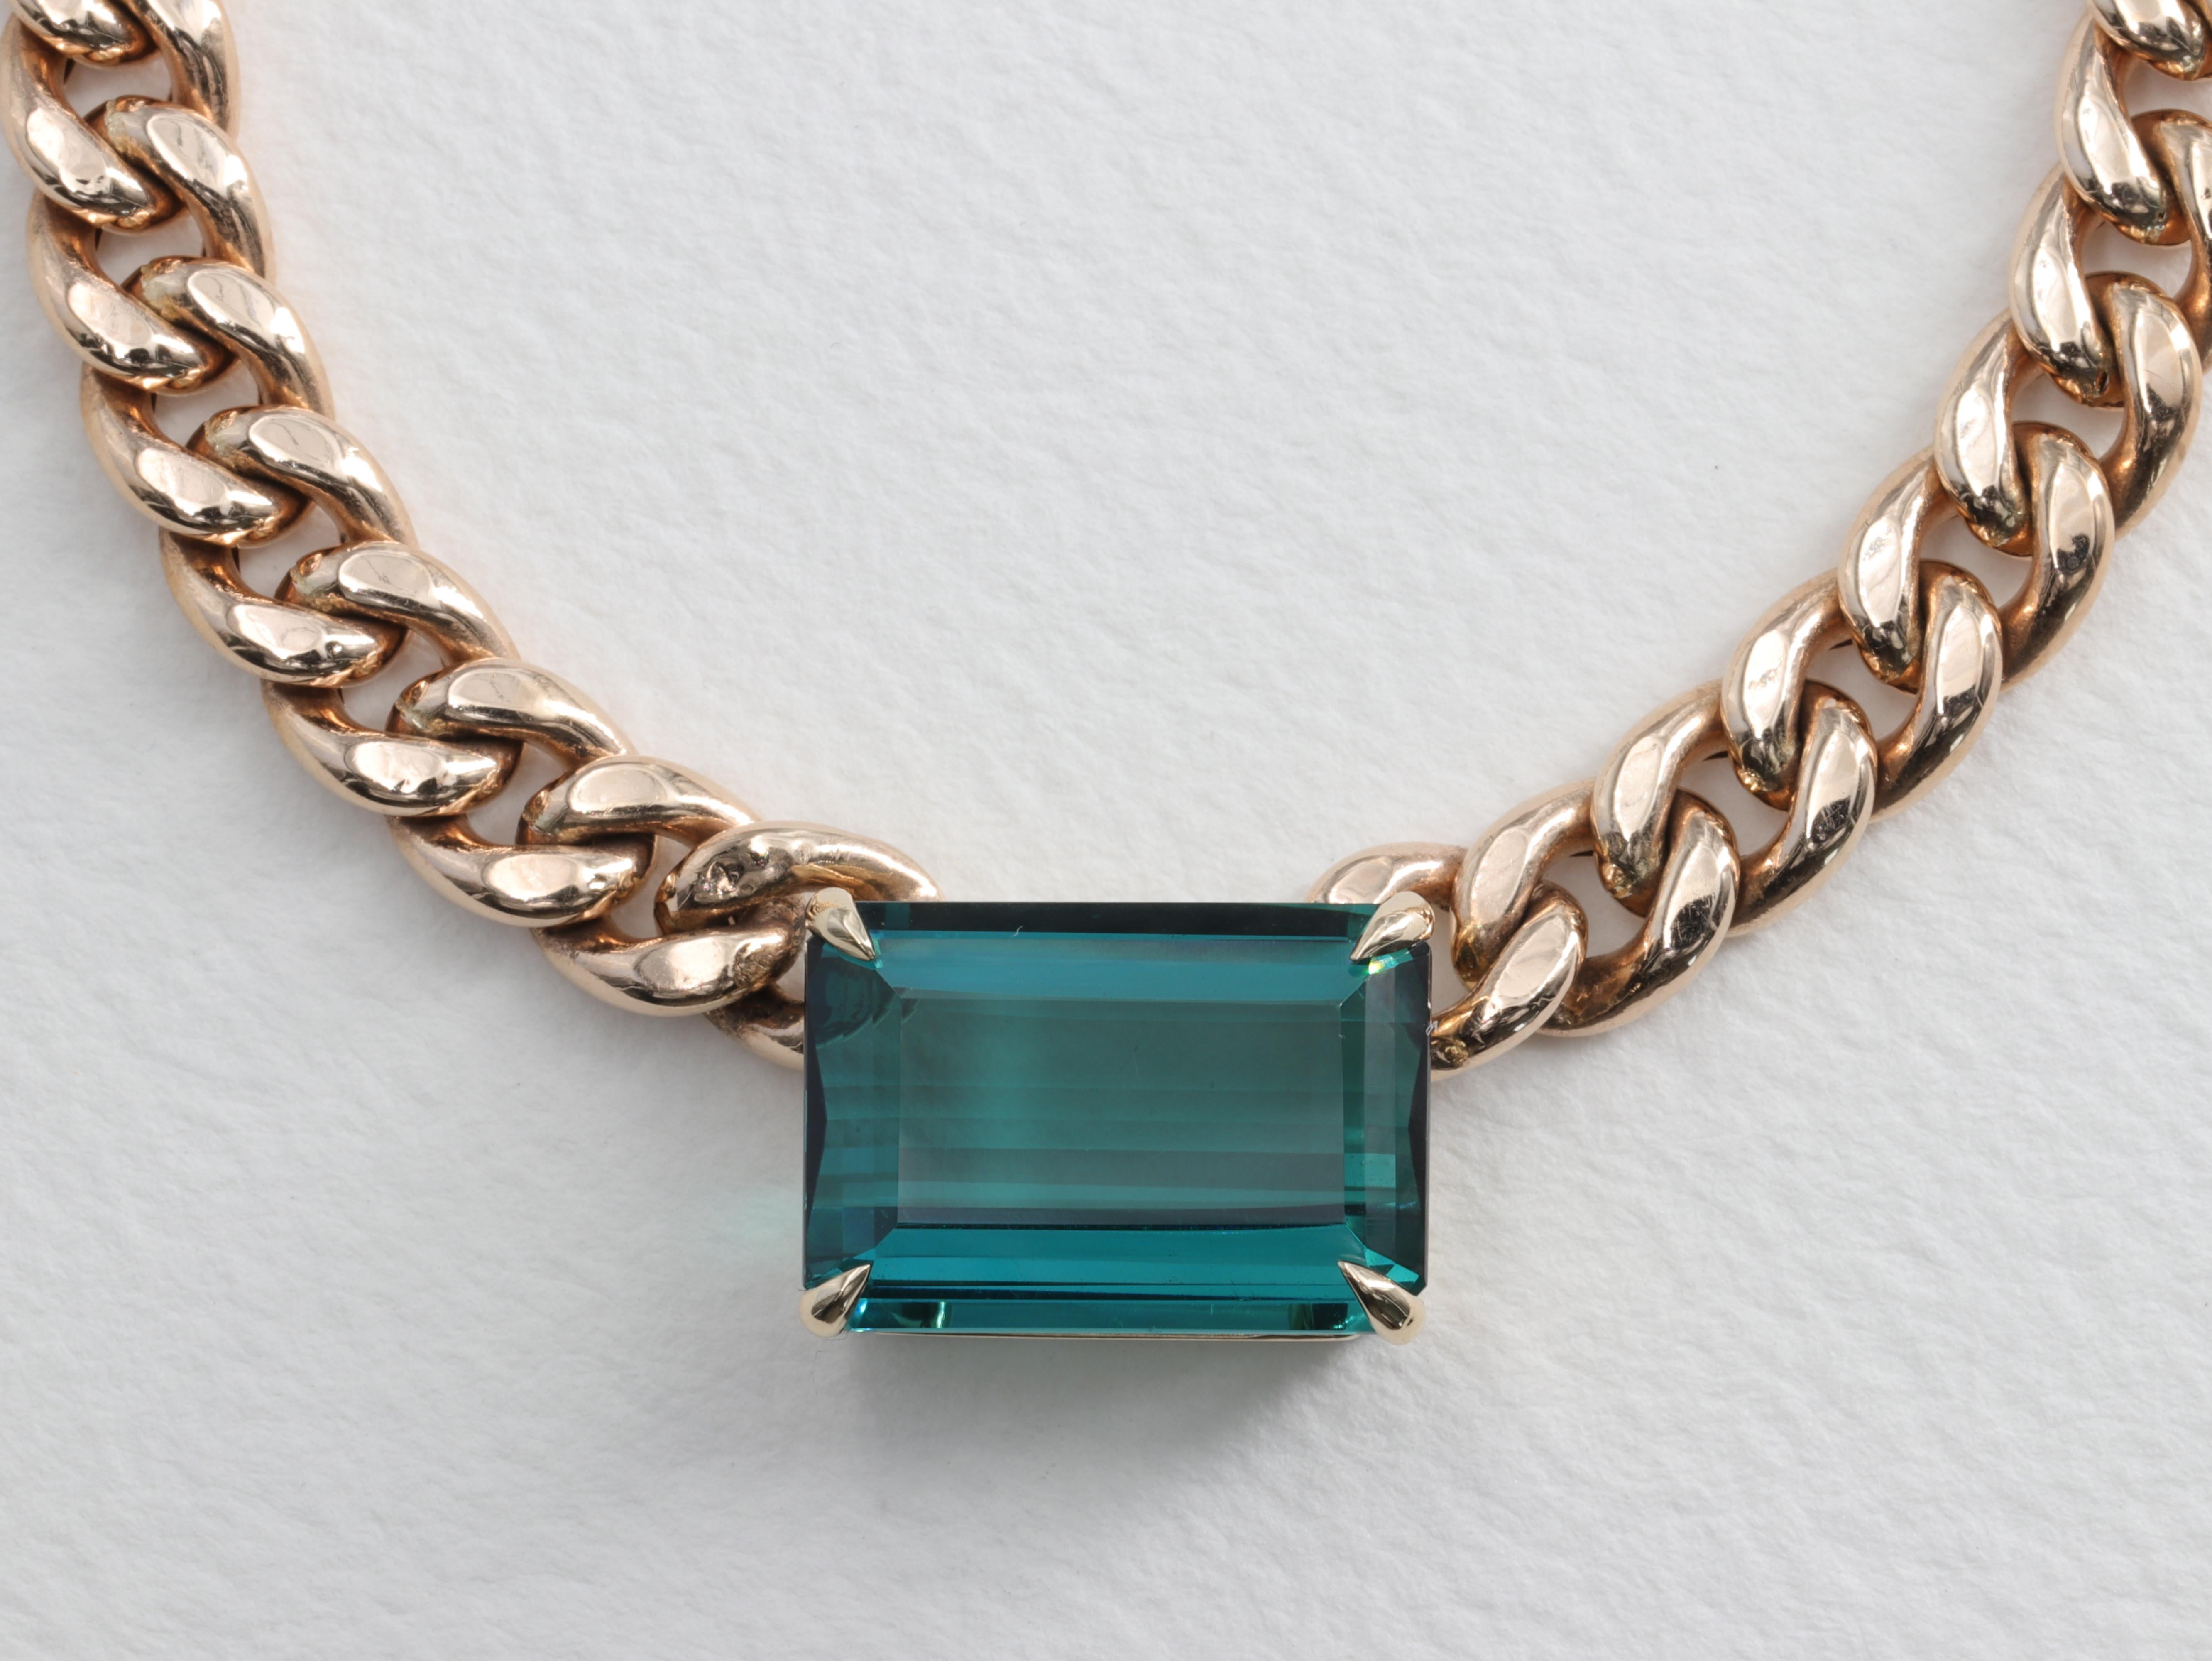 Exceptional Indicolite Tourmaline Necklace Vintage Curb Link 14 Karat Yellow Gold Chain

Tourmaline:

Color- Blue Green 
Measurement - 17 x 12 x 6.8
Weight - 12.5 Carats

Chain:

Semi Solid
Length - 15in 
Weight - 26.6 G
Hallmarks - 14K / Italy / AFR